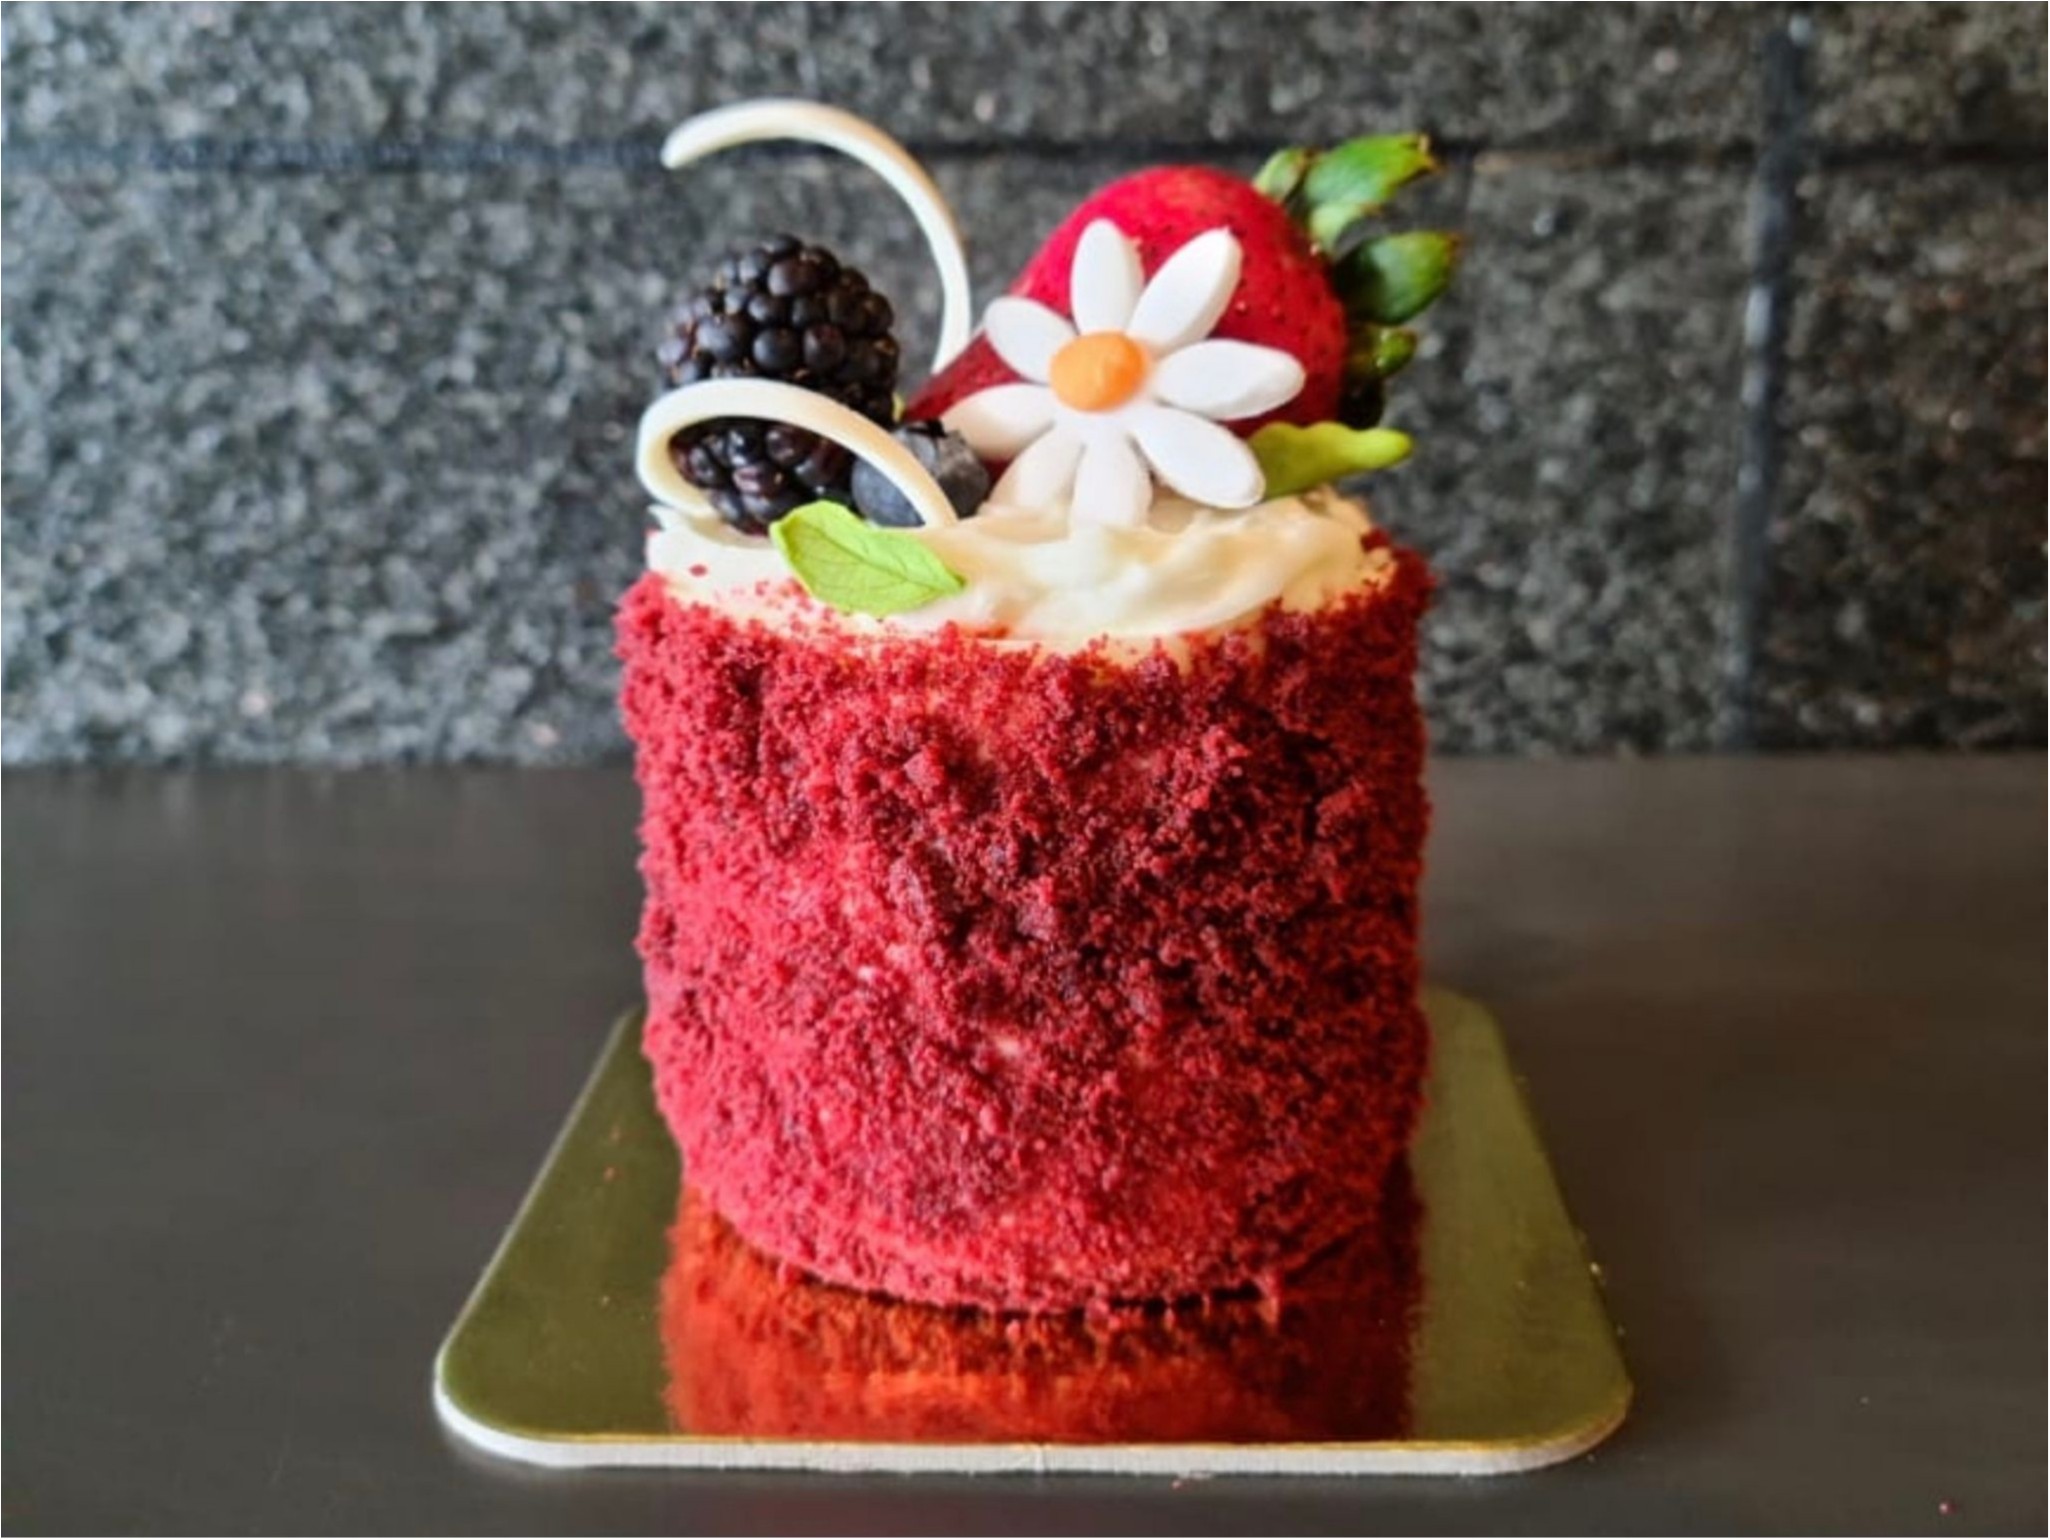 Conrad Manila - Treat mom to a limited edition heart-shaped, red velvet  cake with vanilla and cream cheese. Price starts at Php 2,200 nett.